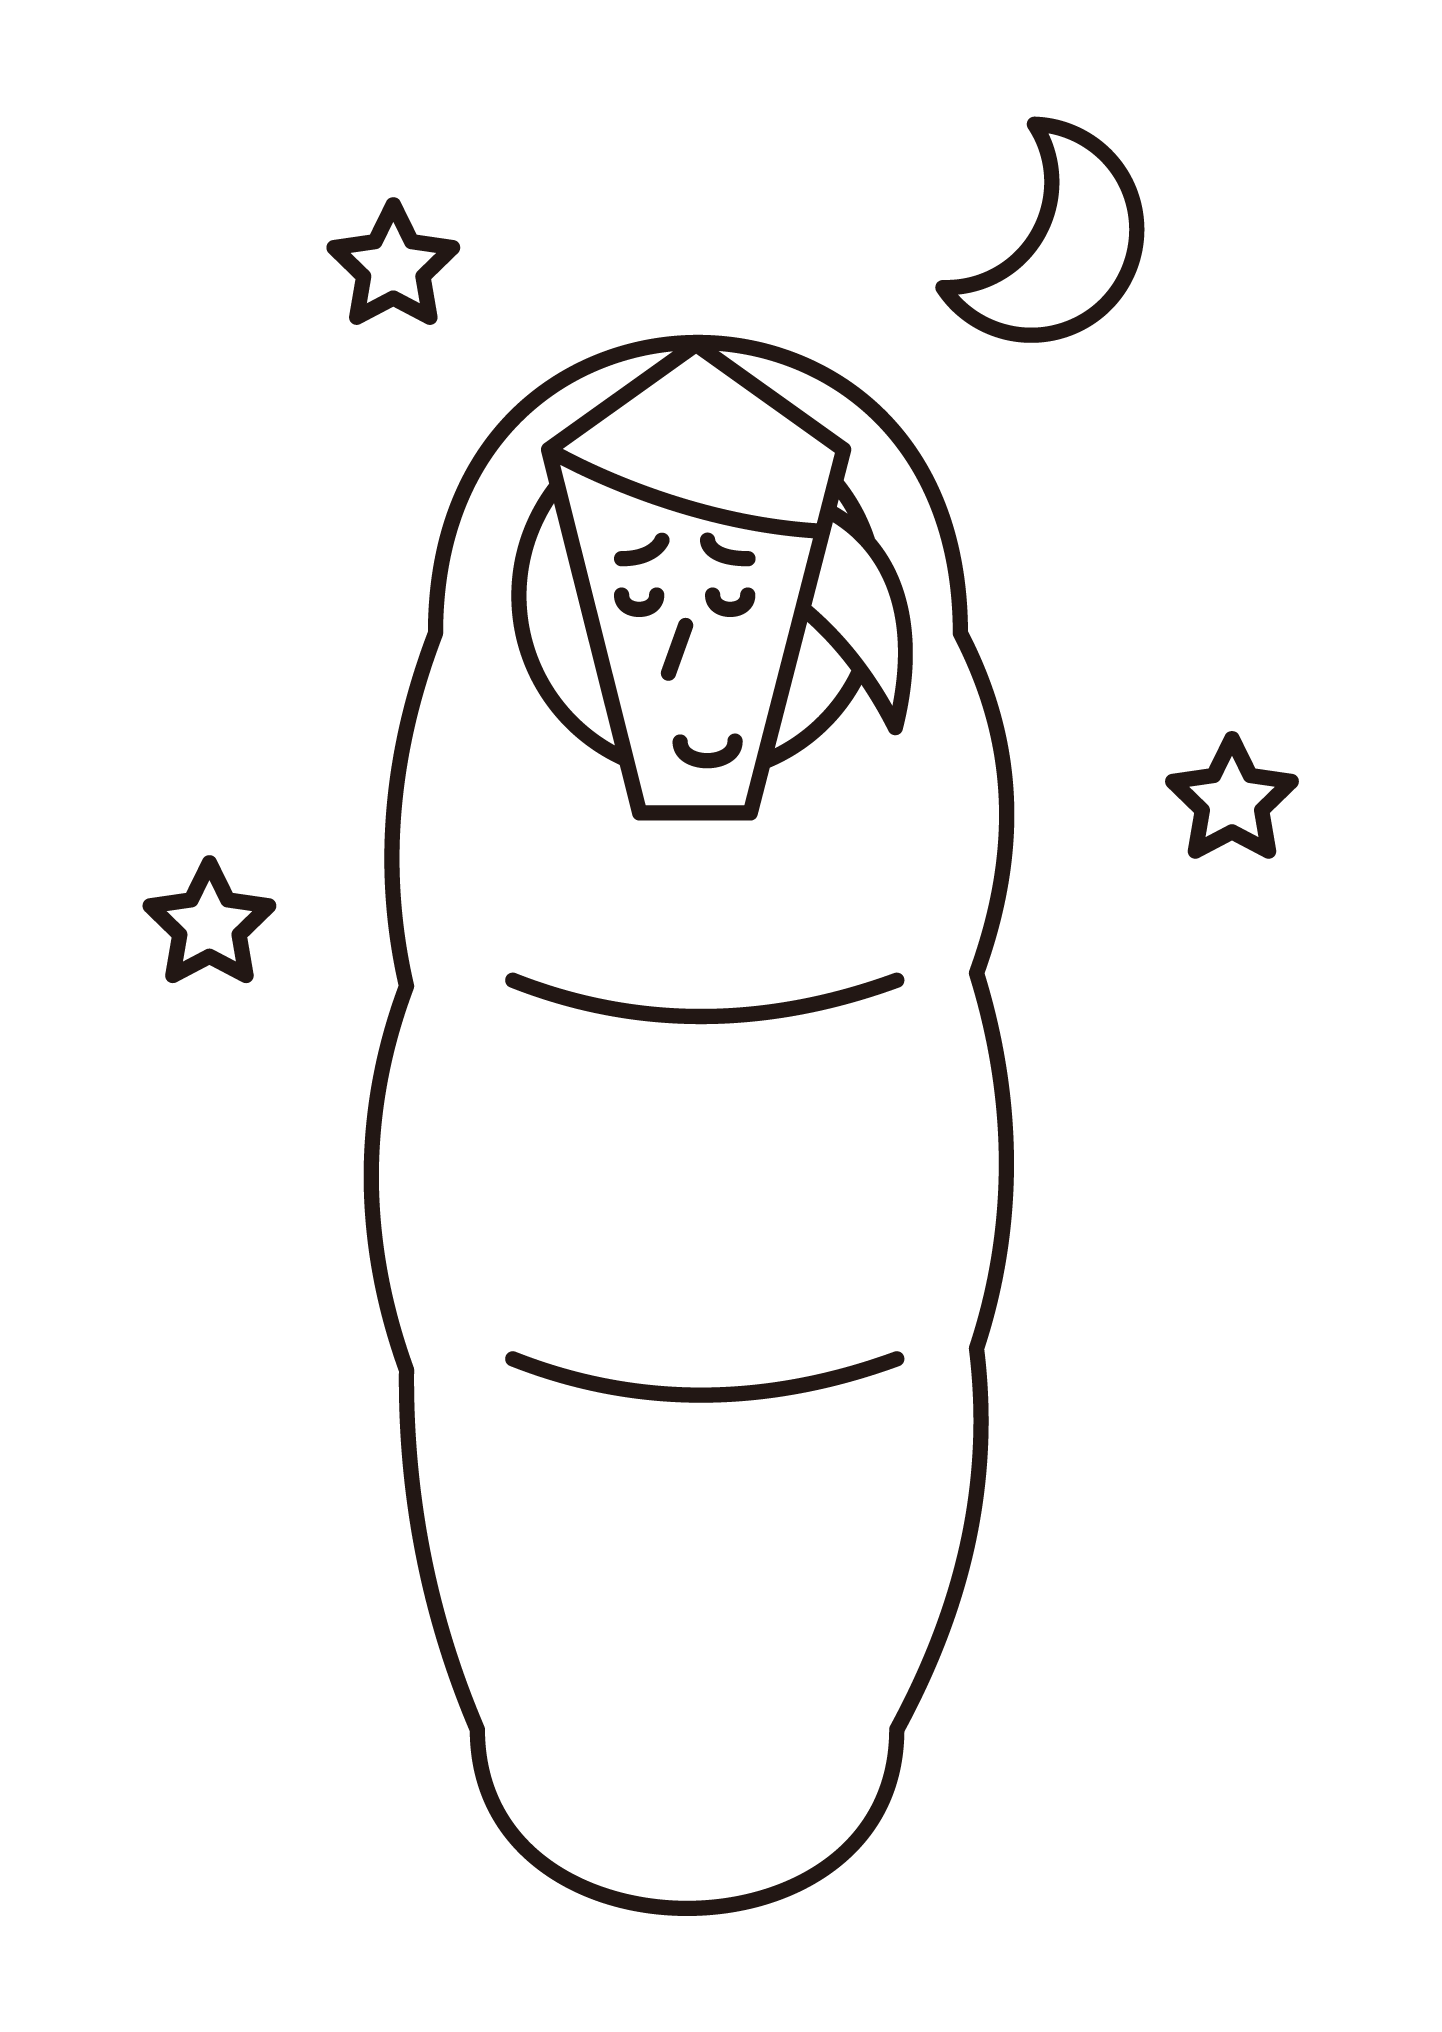 Illustration of a woman in a sleeping bag